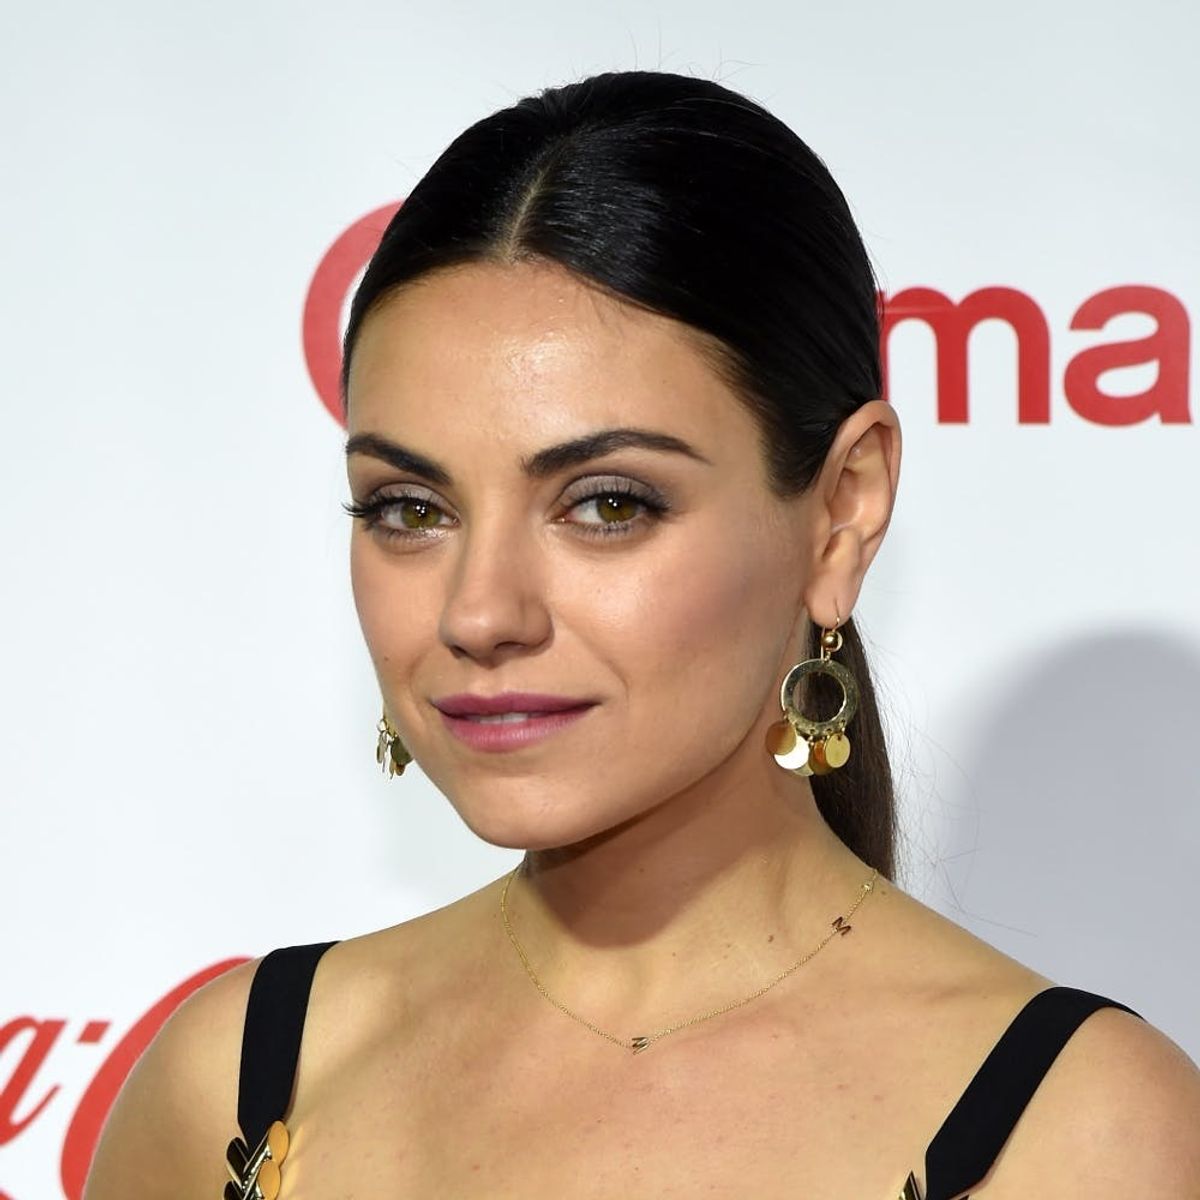 You Won’t Believe How Much Mila Kunis Paid for Her Etsy Wedding Rings